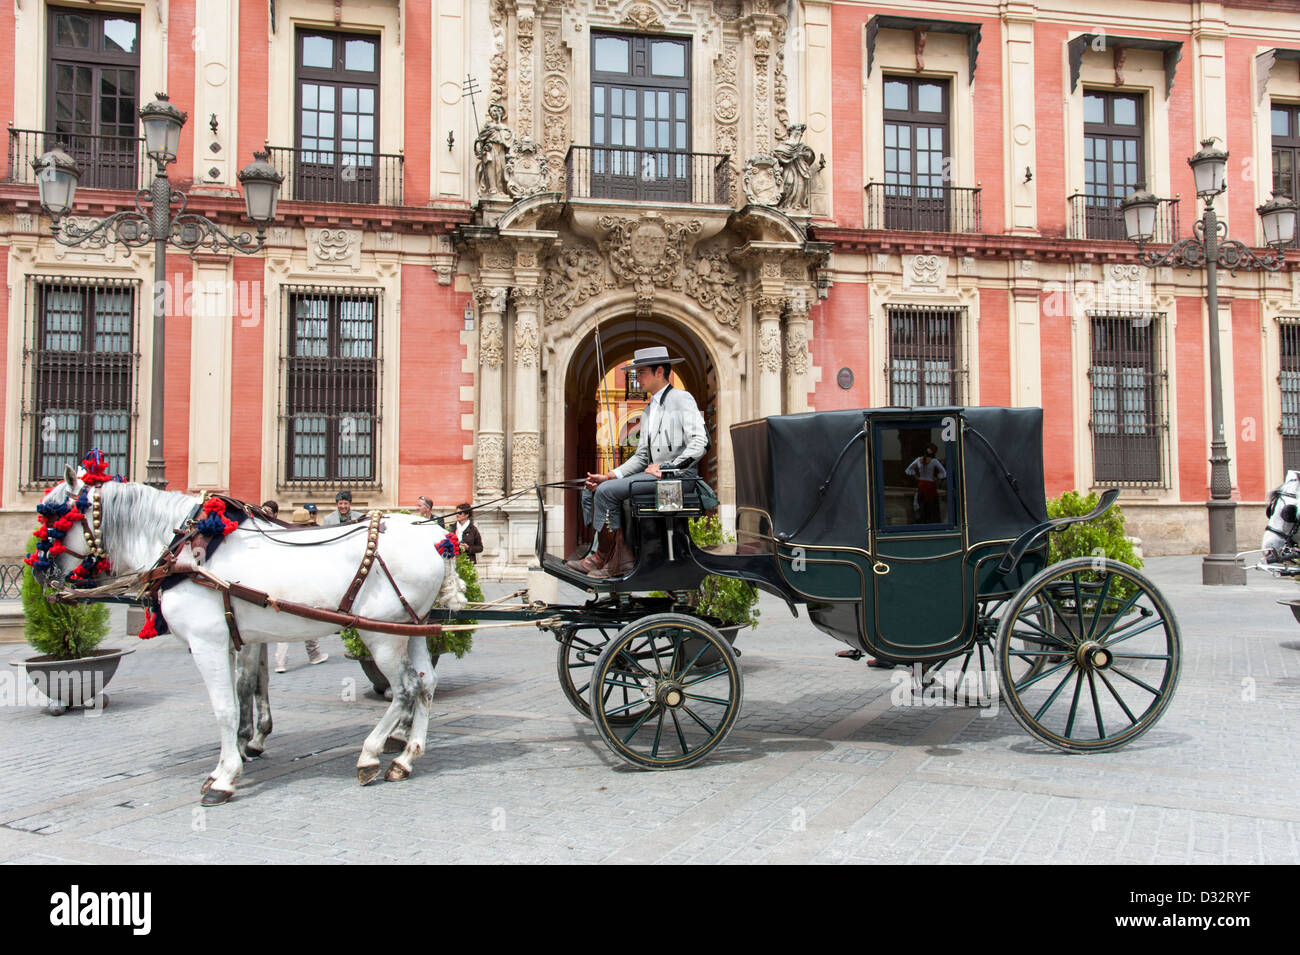 Horse and carriage, Seville, Spain Stock Photo